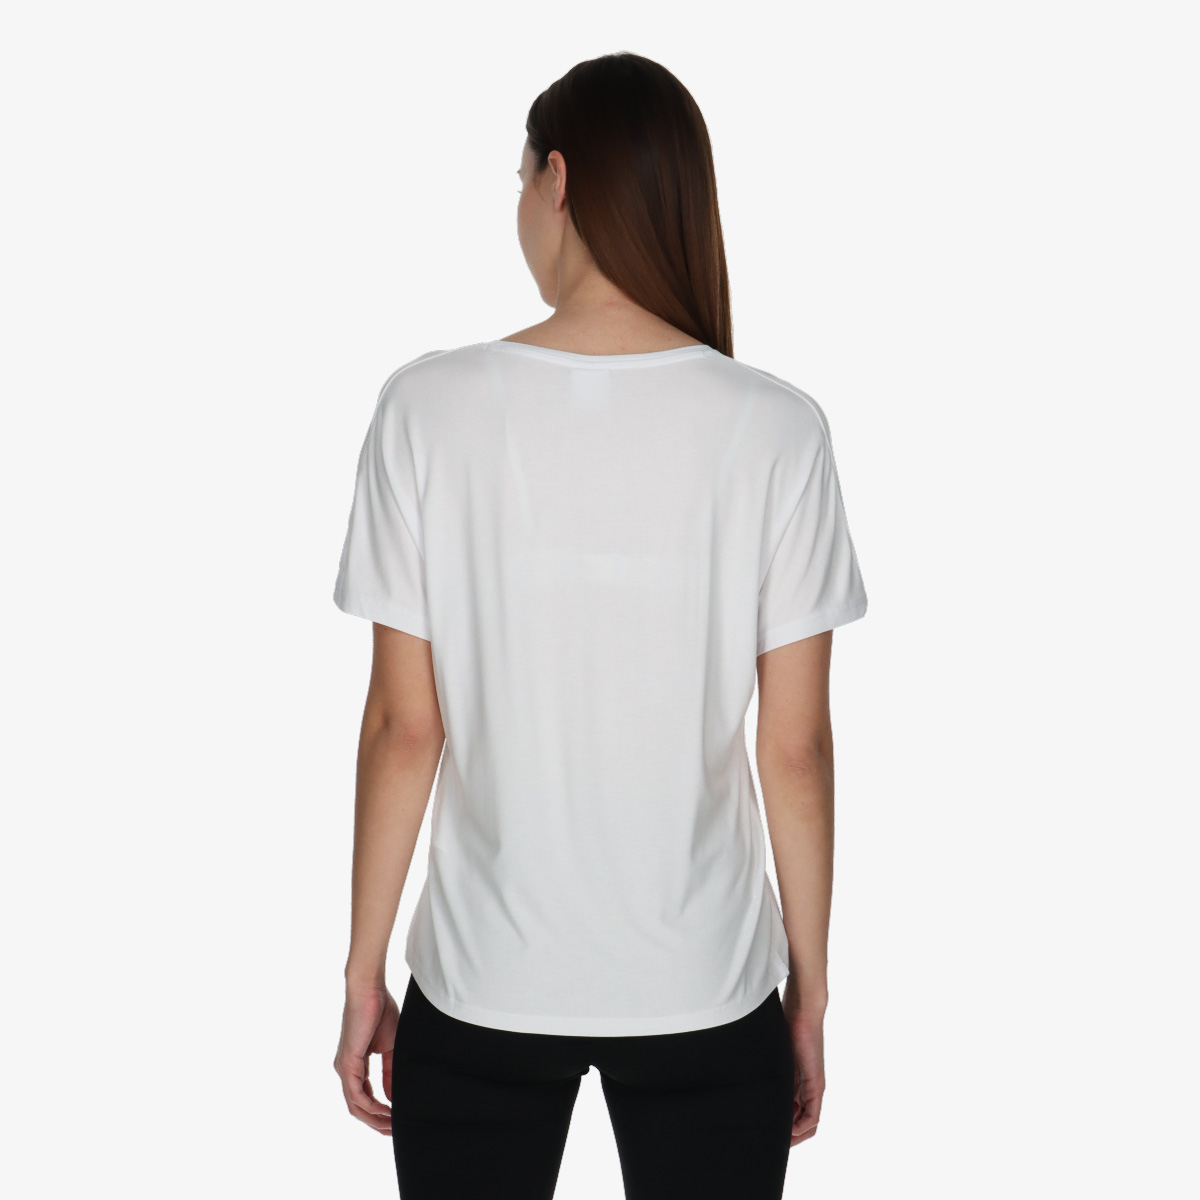 AUTHENTIC ATHLETICWEAR T-SHIRT 